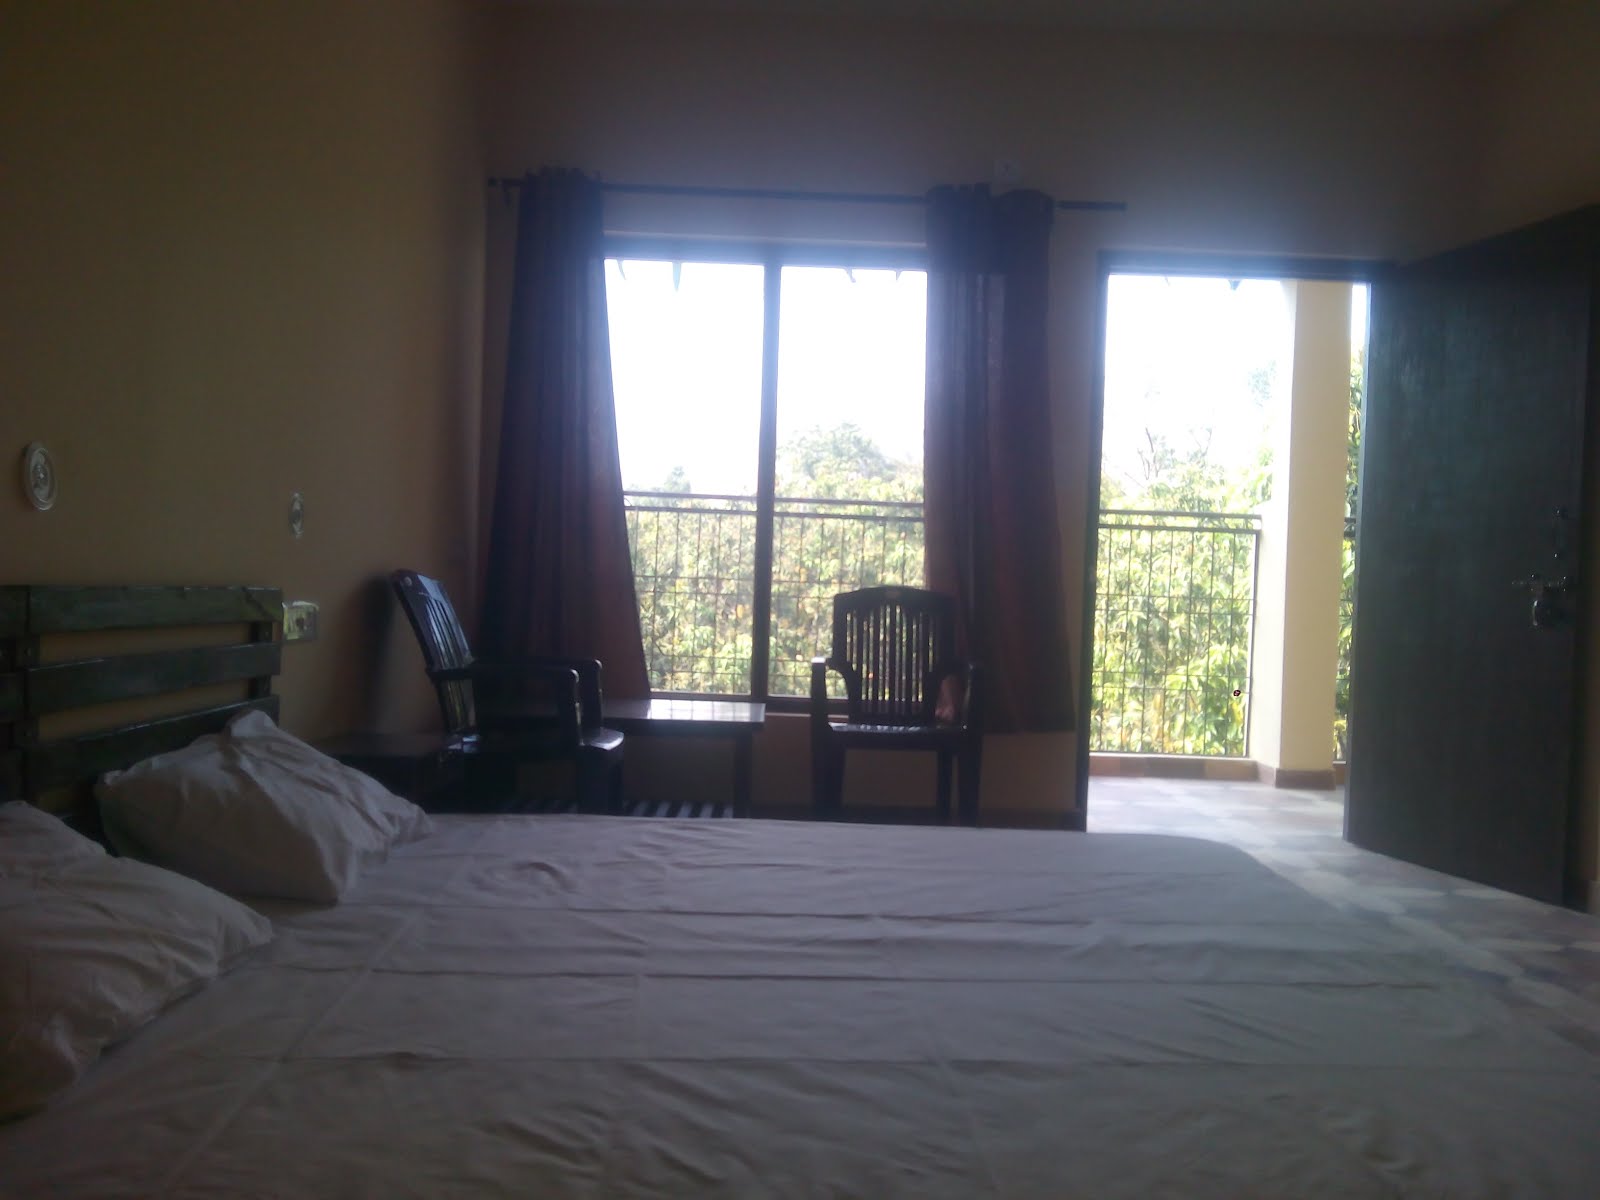 ROOM VIEW